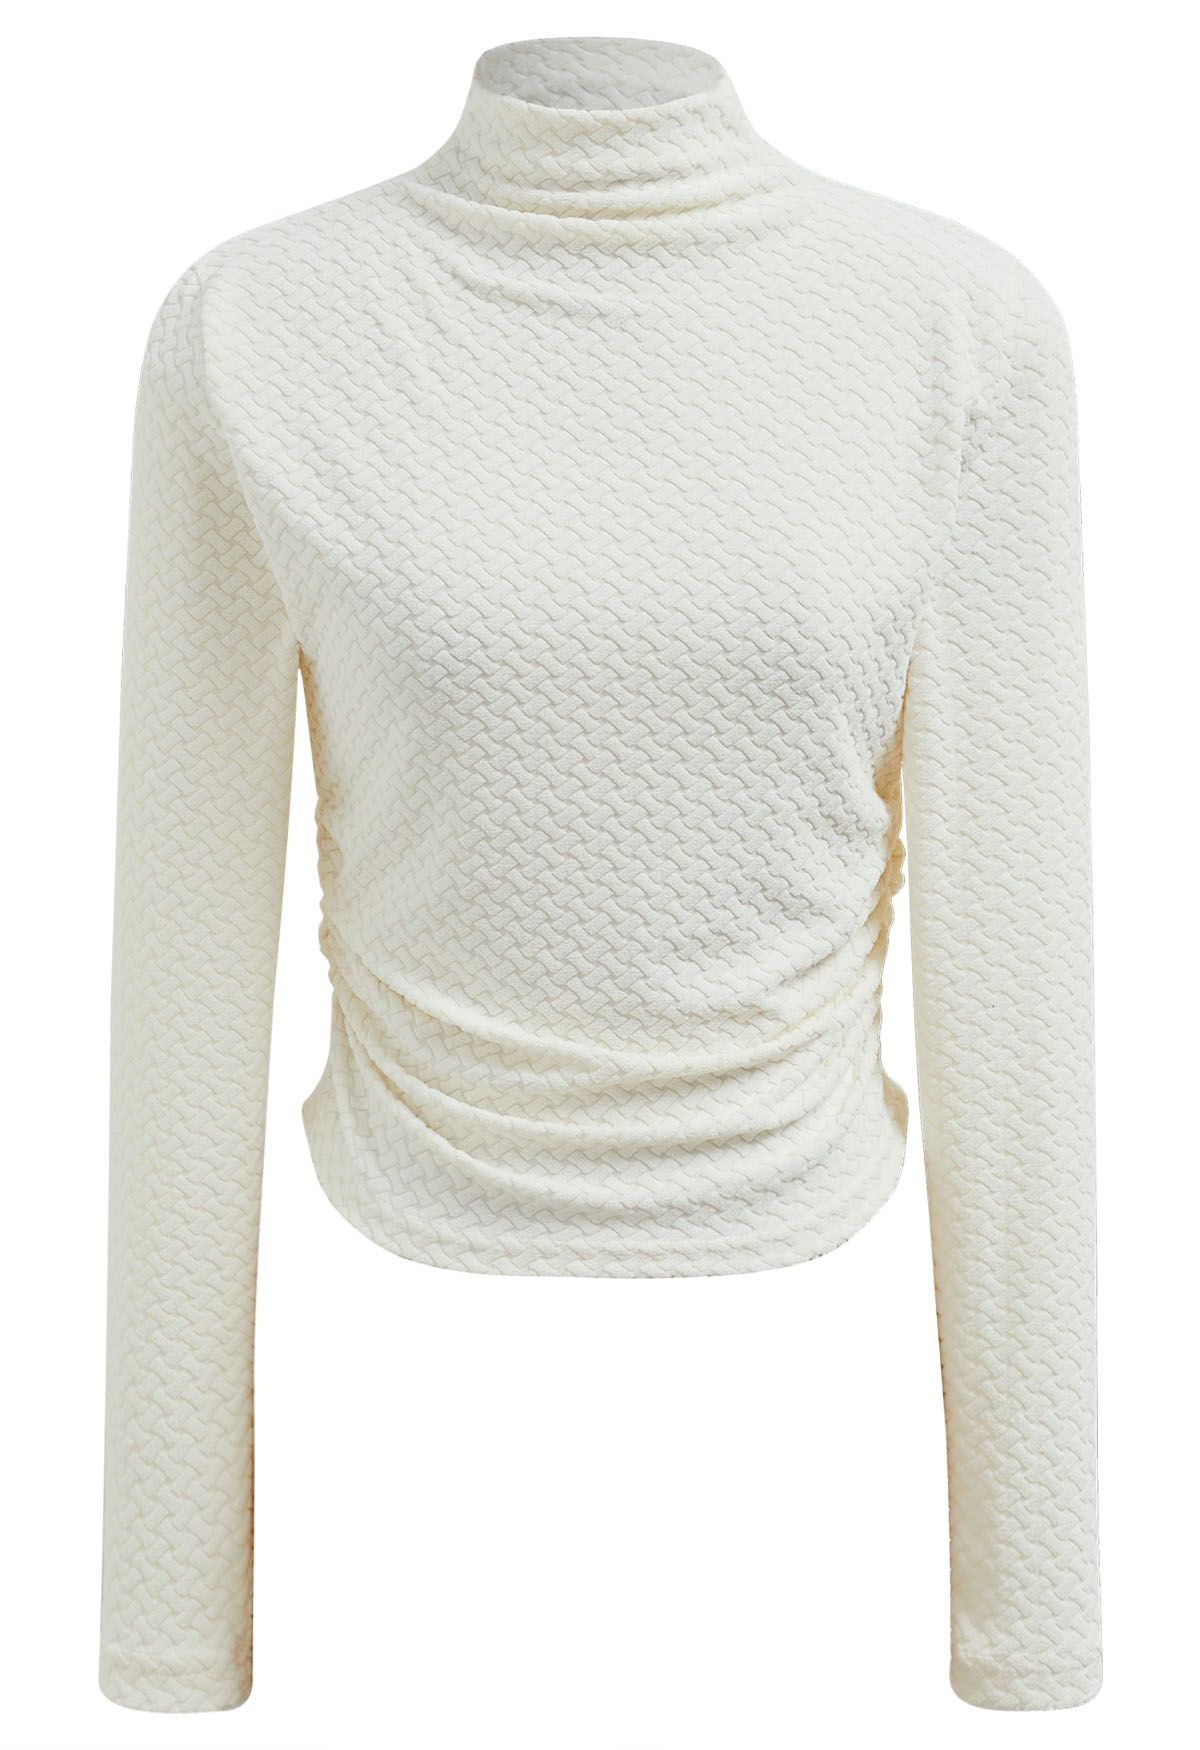 High Neck Textured Ruched Top in Ivory